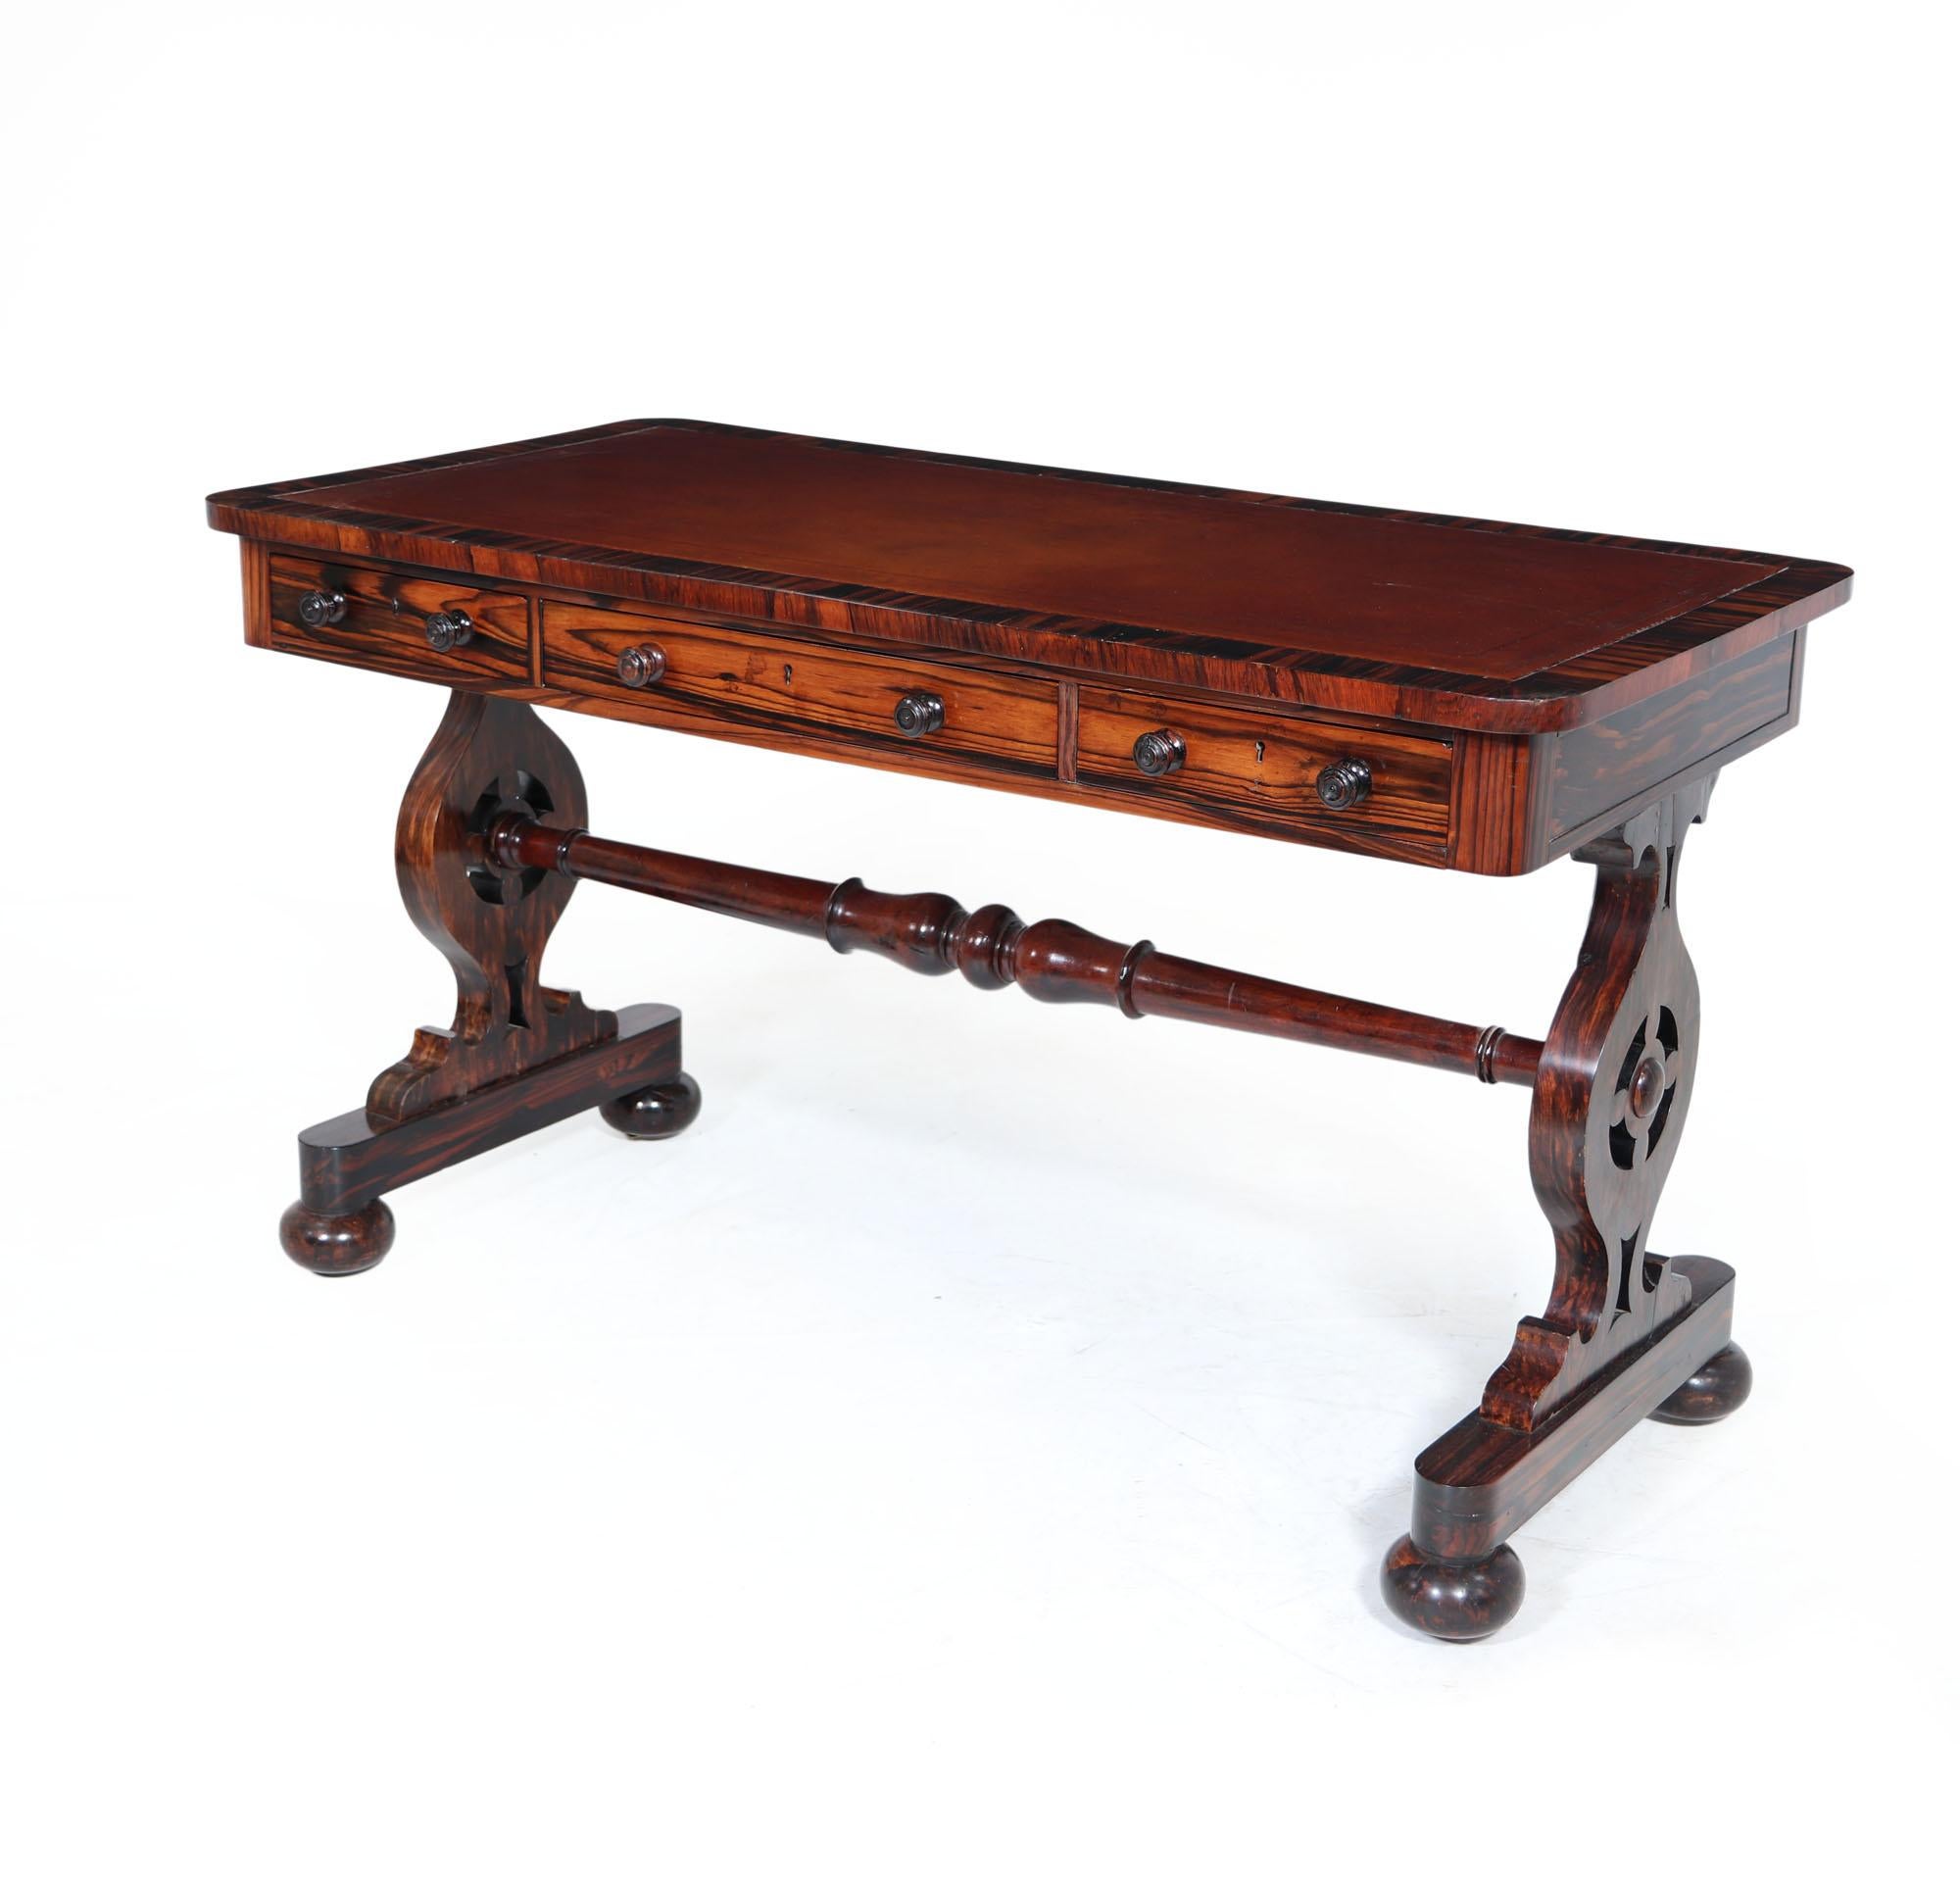 William IV library table
Produced in England in the Mid-19th Century this is a extremely rare example produced in Coramandel having solid drawer fronts thick veneers and simulated uprights, the library table has a tooled Hyde leather top that has